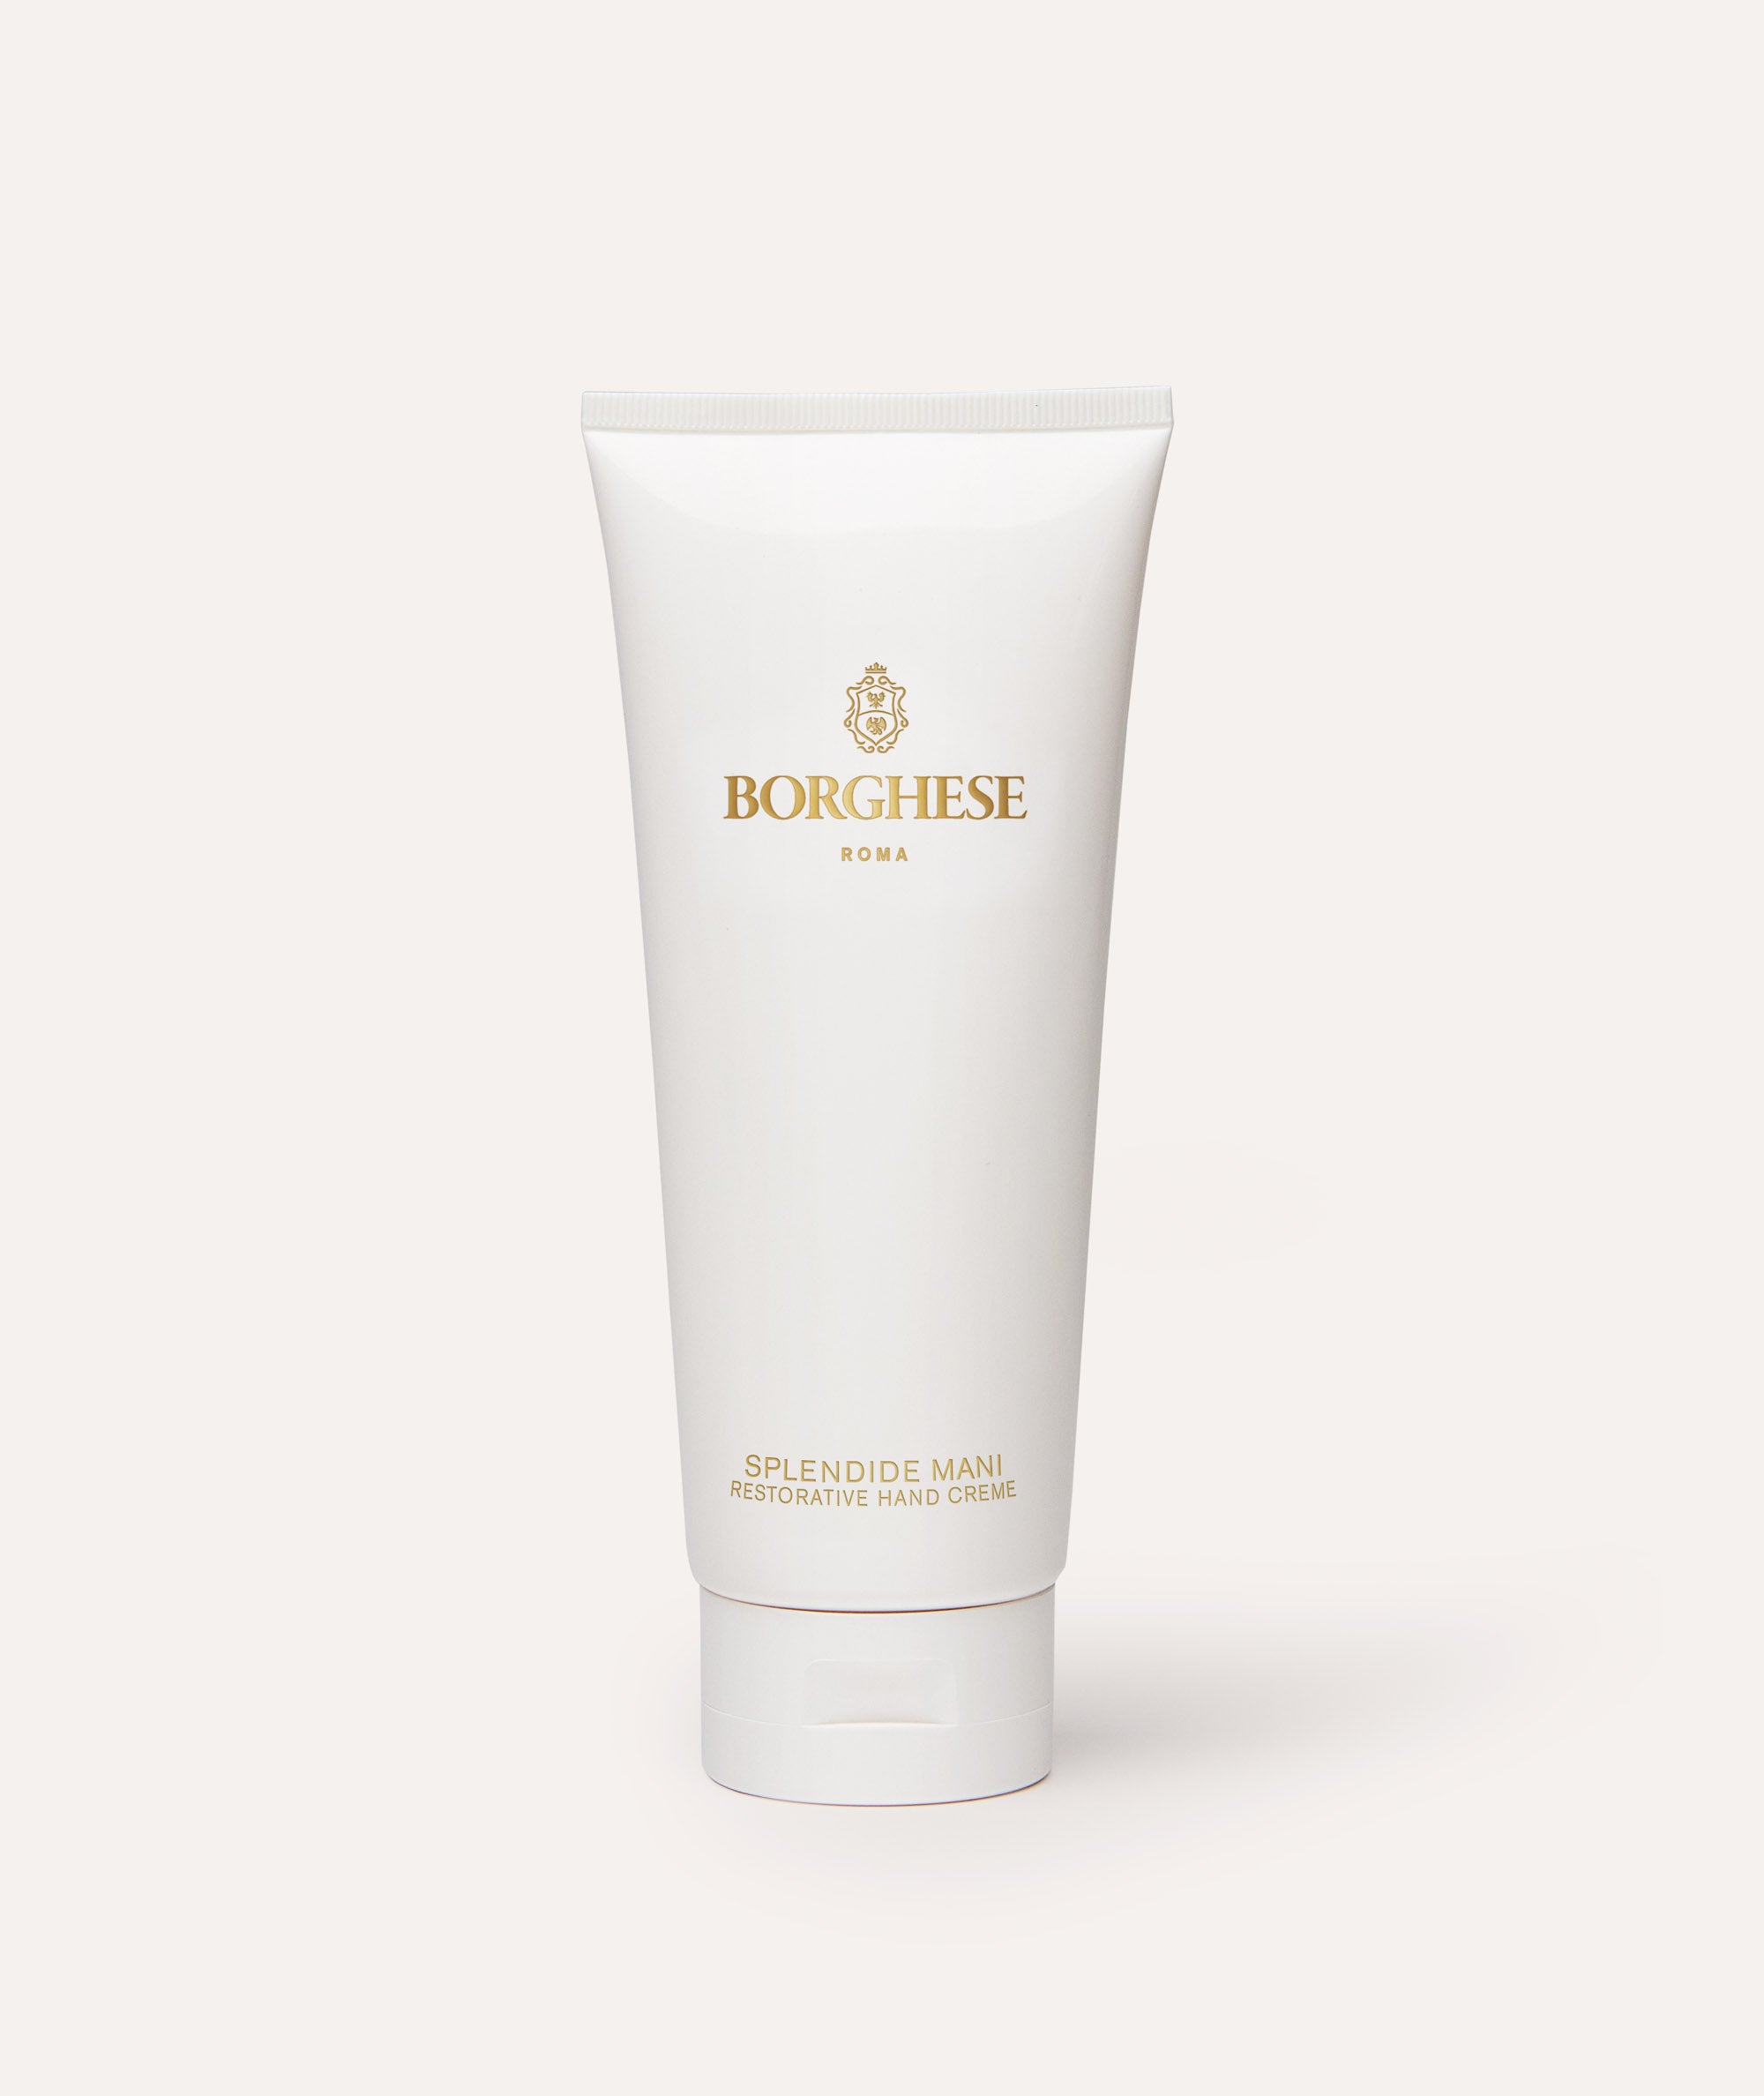 This is a picture of the Borghese Splendide Mani Restorative Hand Creme in a white tube